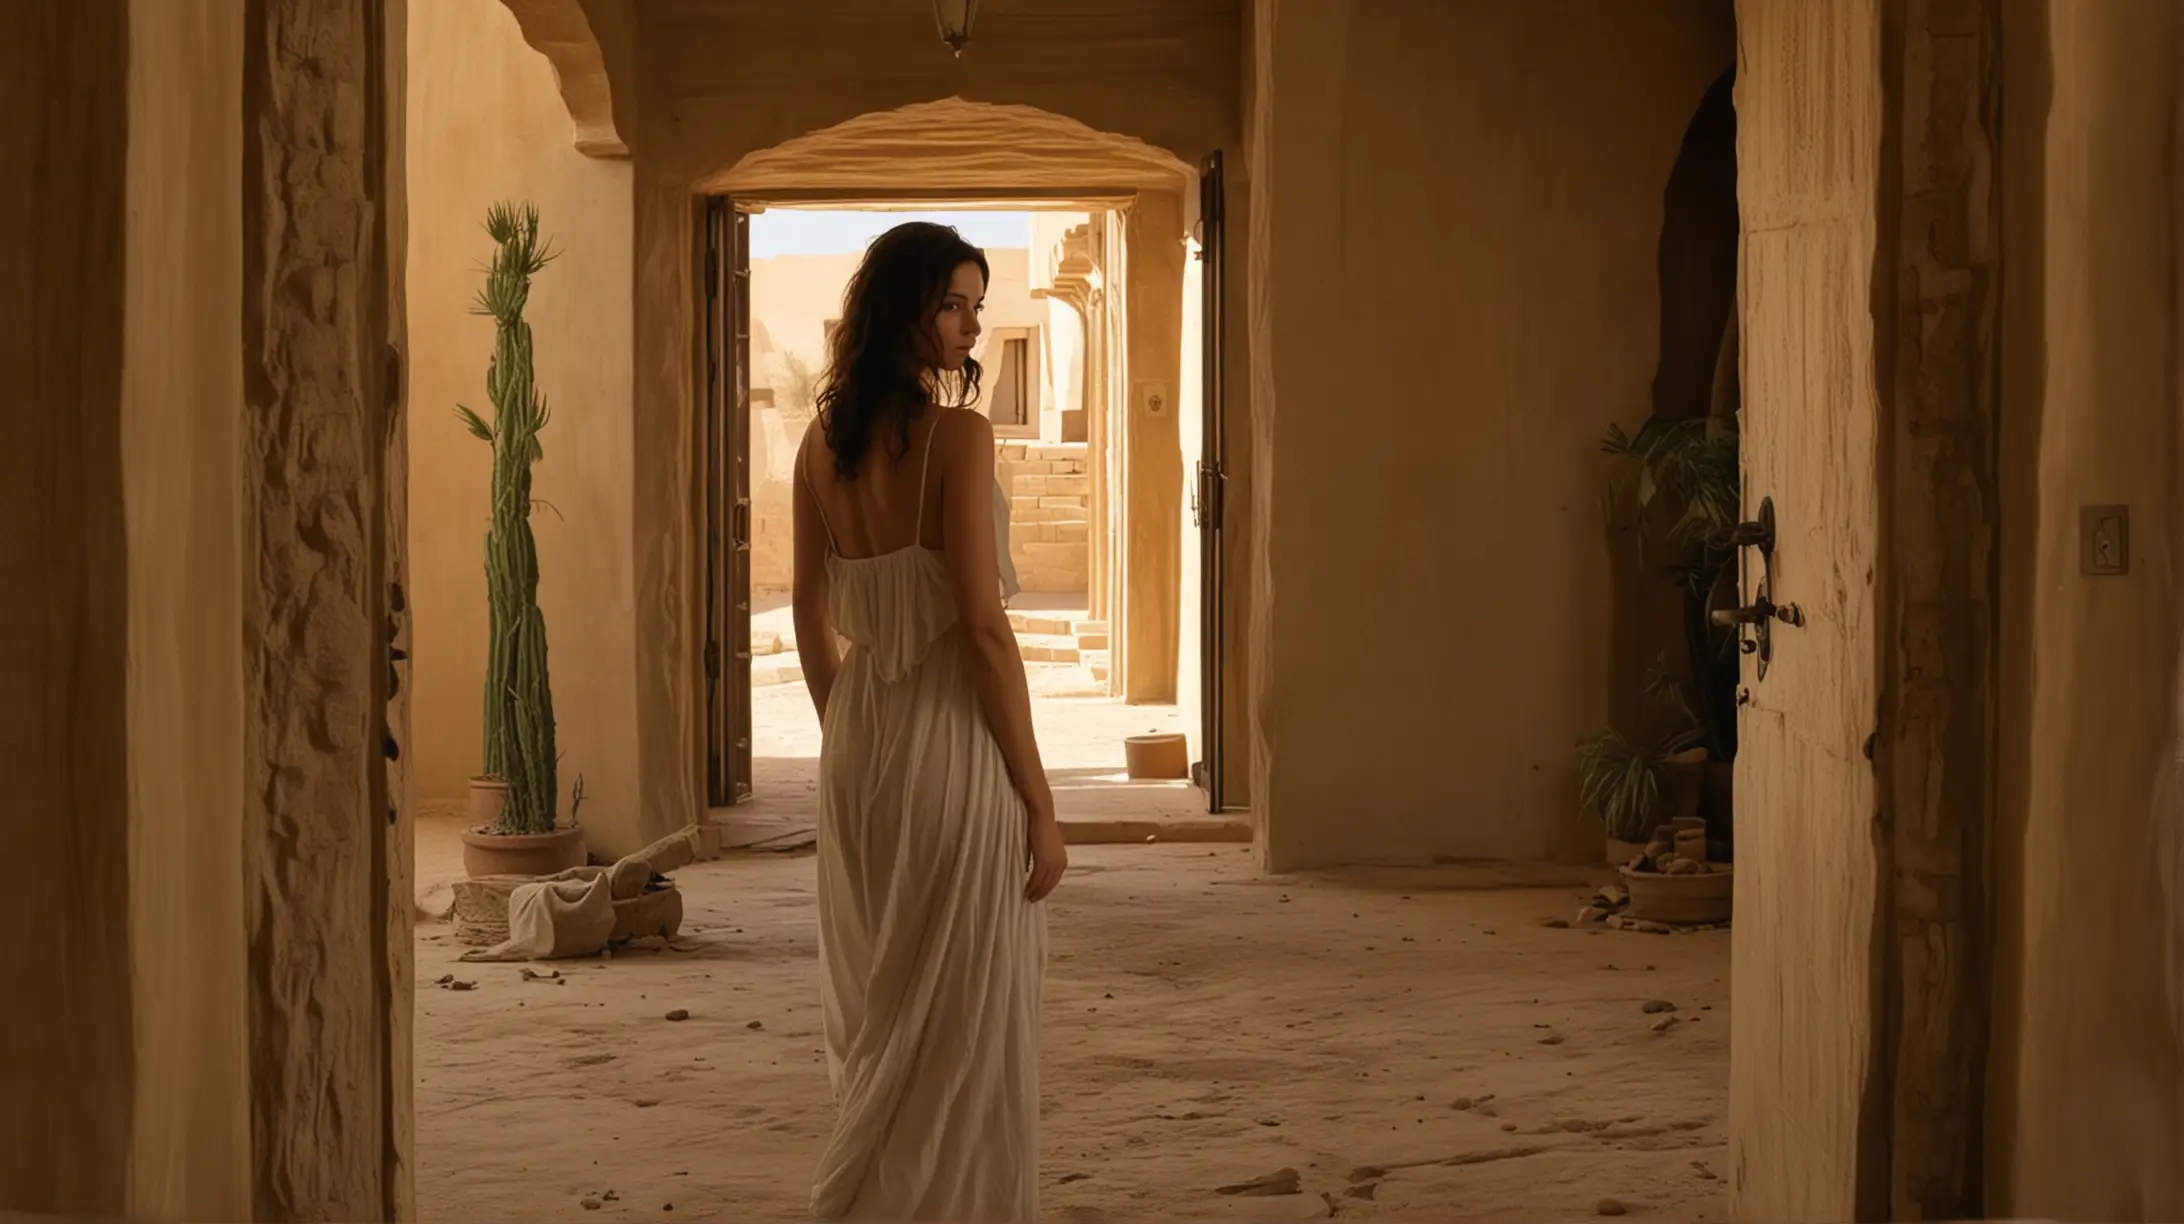  A an attractive woman  in the background exiting through her bedroom door. Set in a Desert Palace. Set during the biblical era of King David.